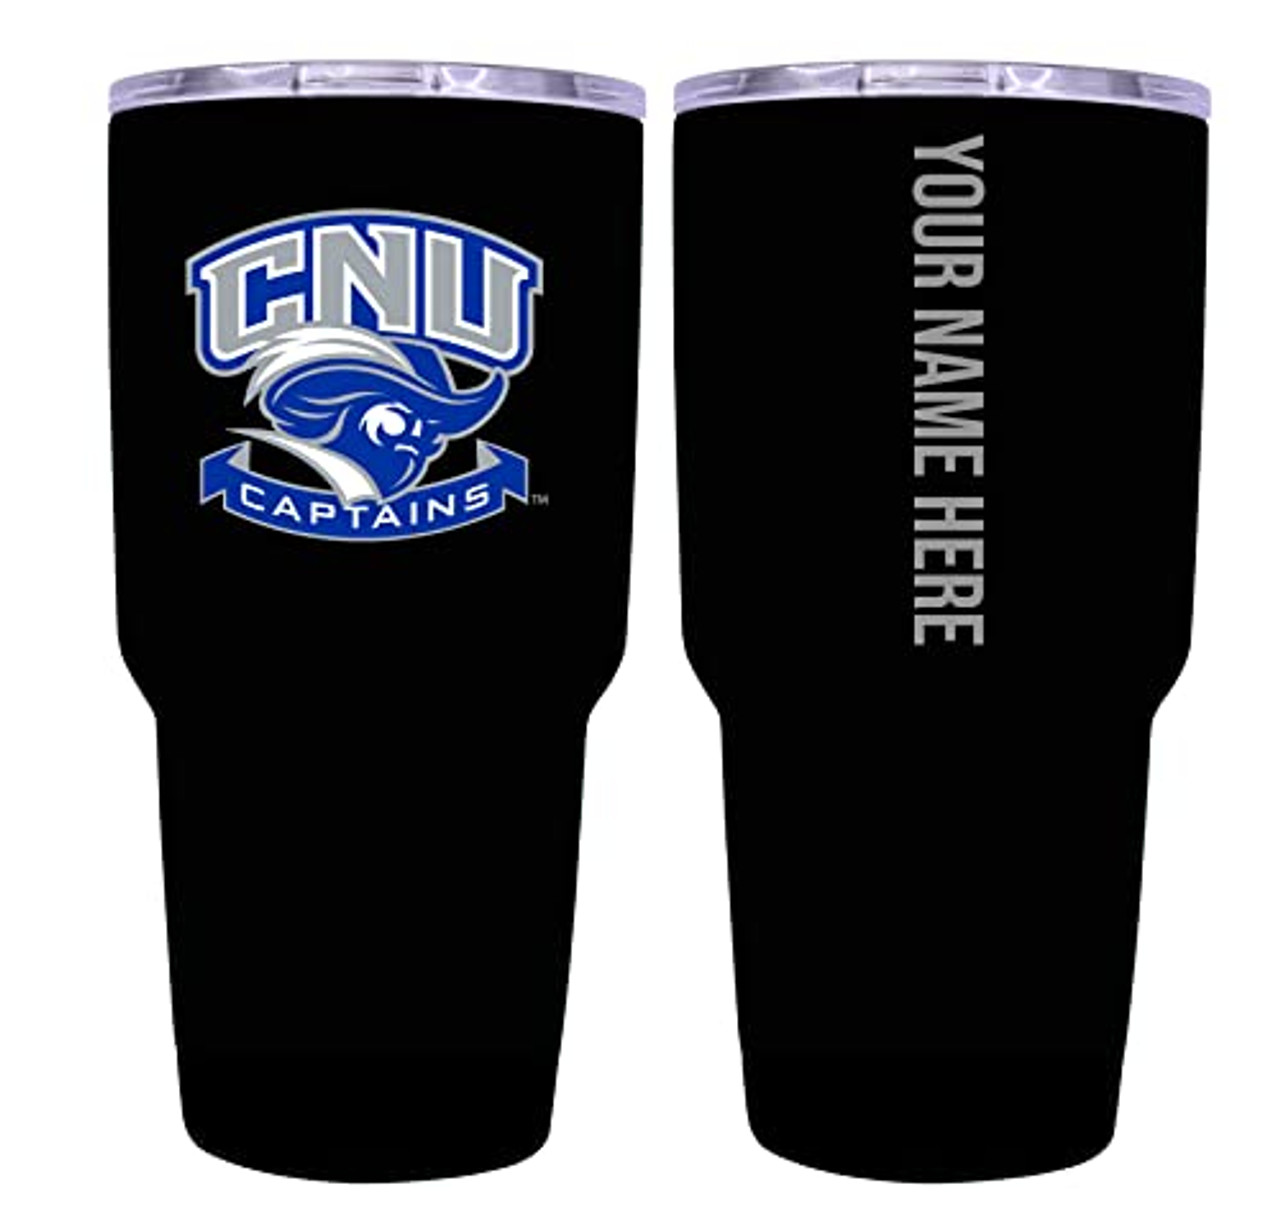 Collegiate Custom Personalized Christopher Newport Captains, 24 oz Insulated Stainless Steel Tumbler with Engraved Name (Black)